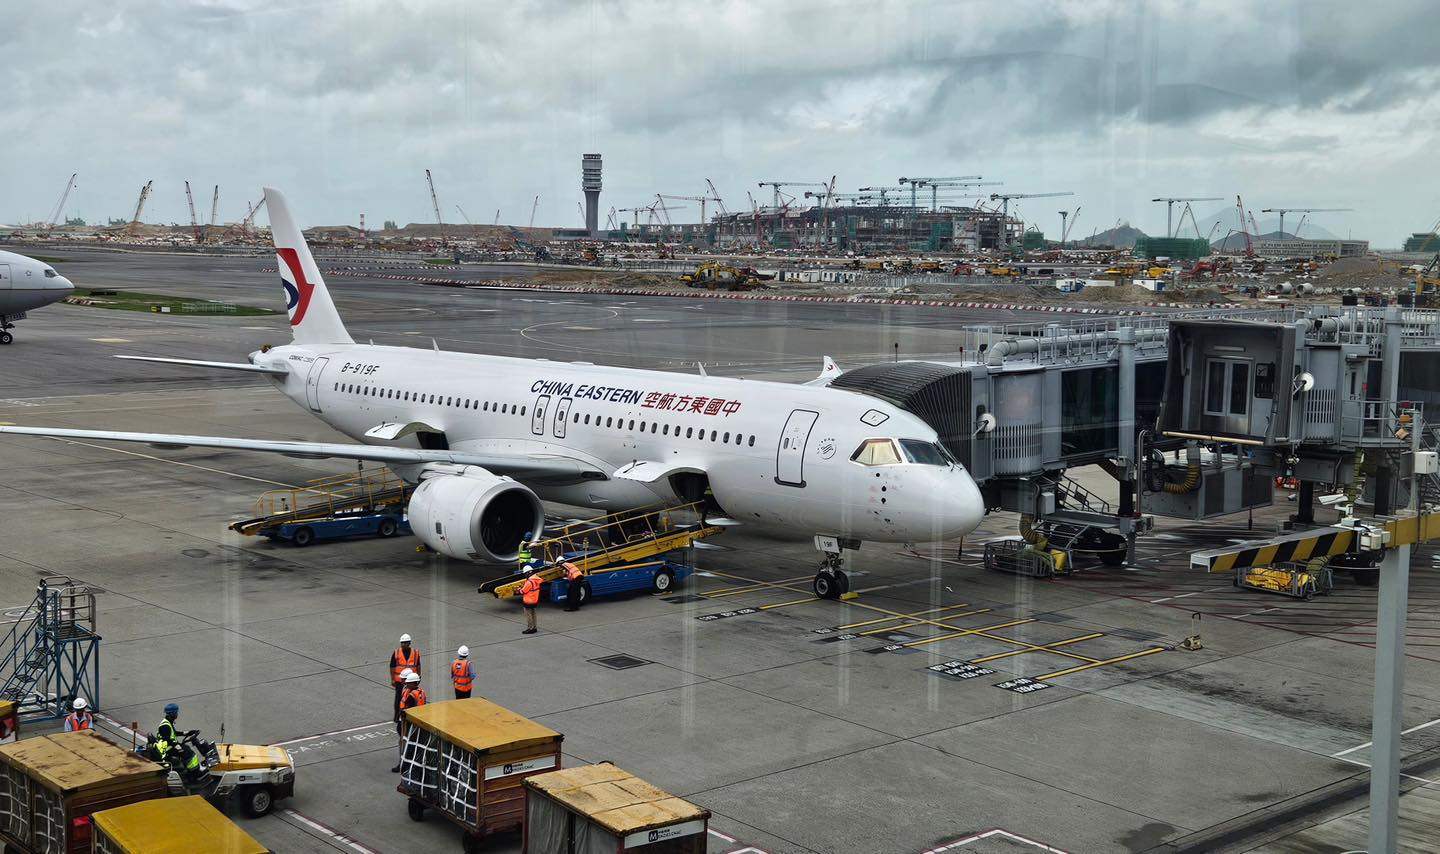 China’s first home-grown narrowbody jet prepares for its first commercial flight from Hong Kong on Saturday. Photo: Facebook/Transport and Logistics Bureau